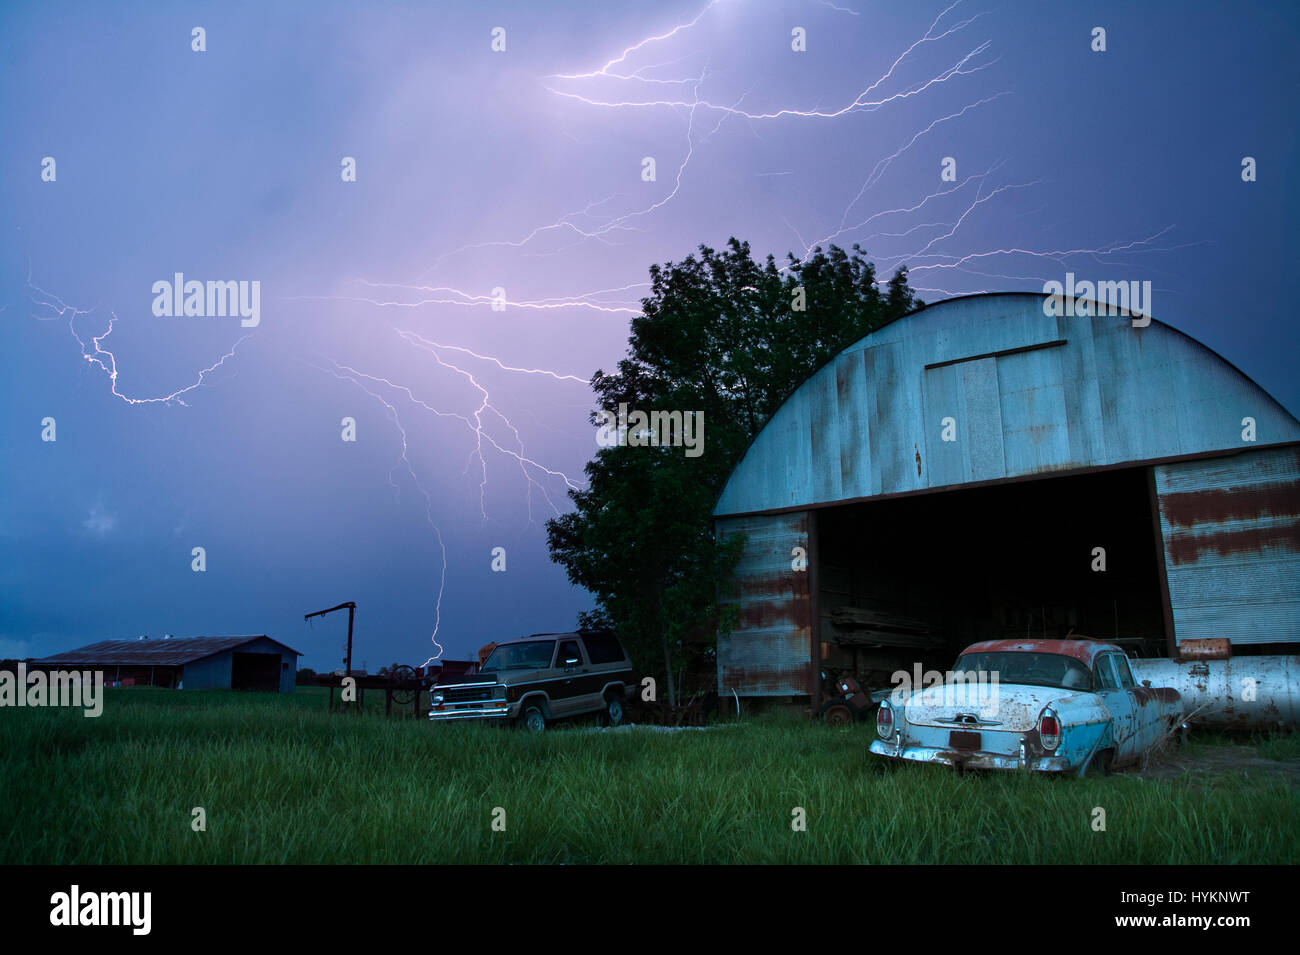 TORNADO ALLEY, USA: THE DEADLIEST weather events have been captured on camera by one lightning quick photographer. Incredible photographs show extreme weather from America’s Tornado Alley, renowned for the frequency of its storms. From terrifying lightning bolts to all-encompassing tornados, these pictures manage to capture to ferocity and atmosphere of these natural phenomena. Stock Photo